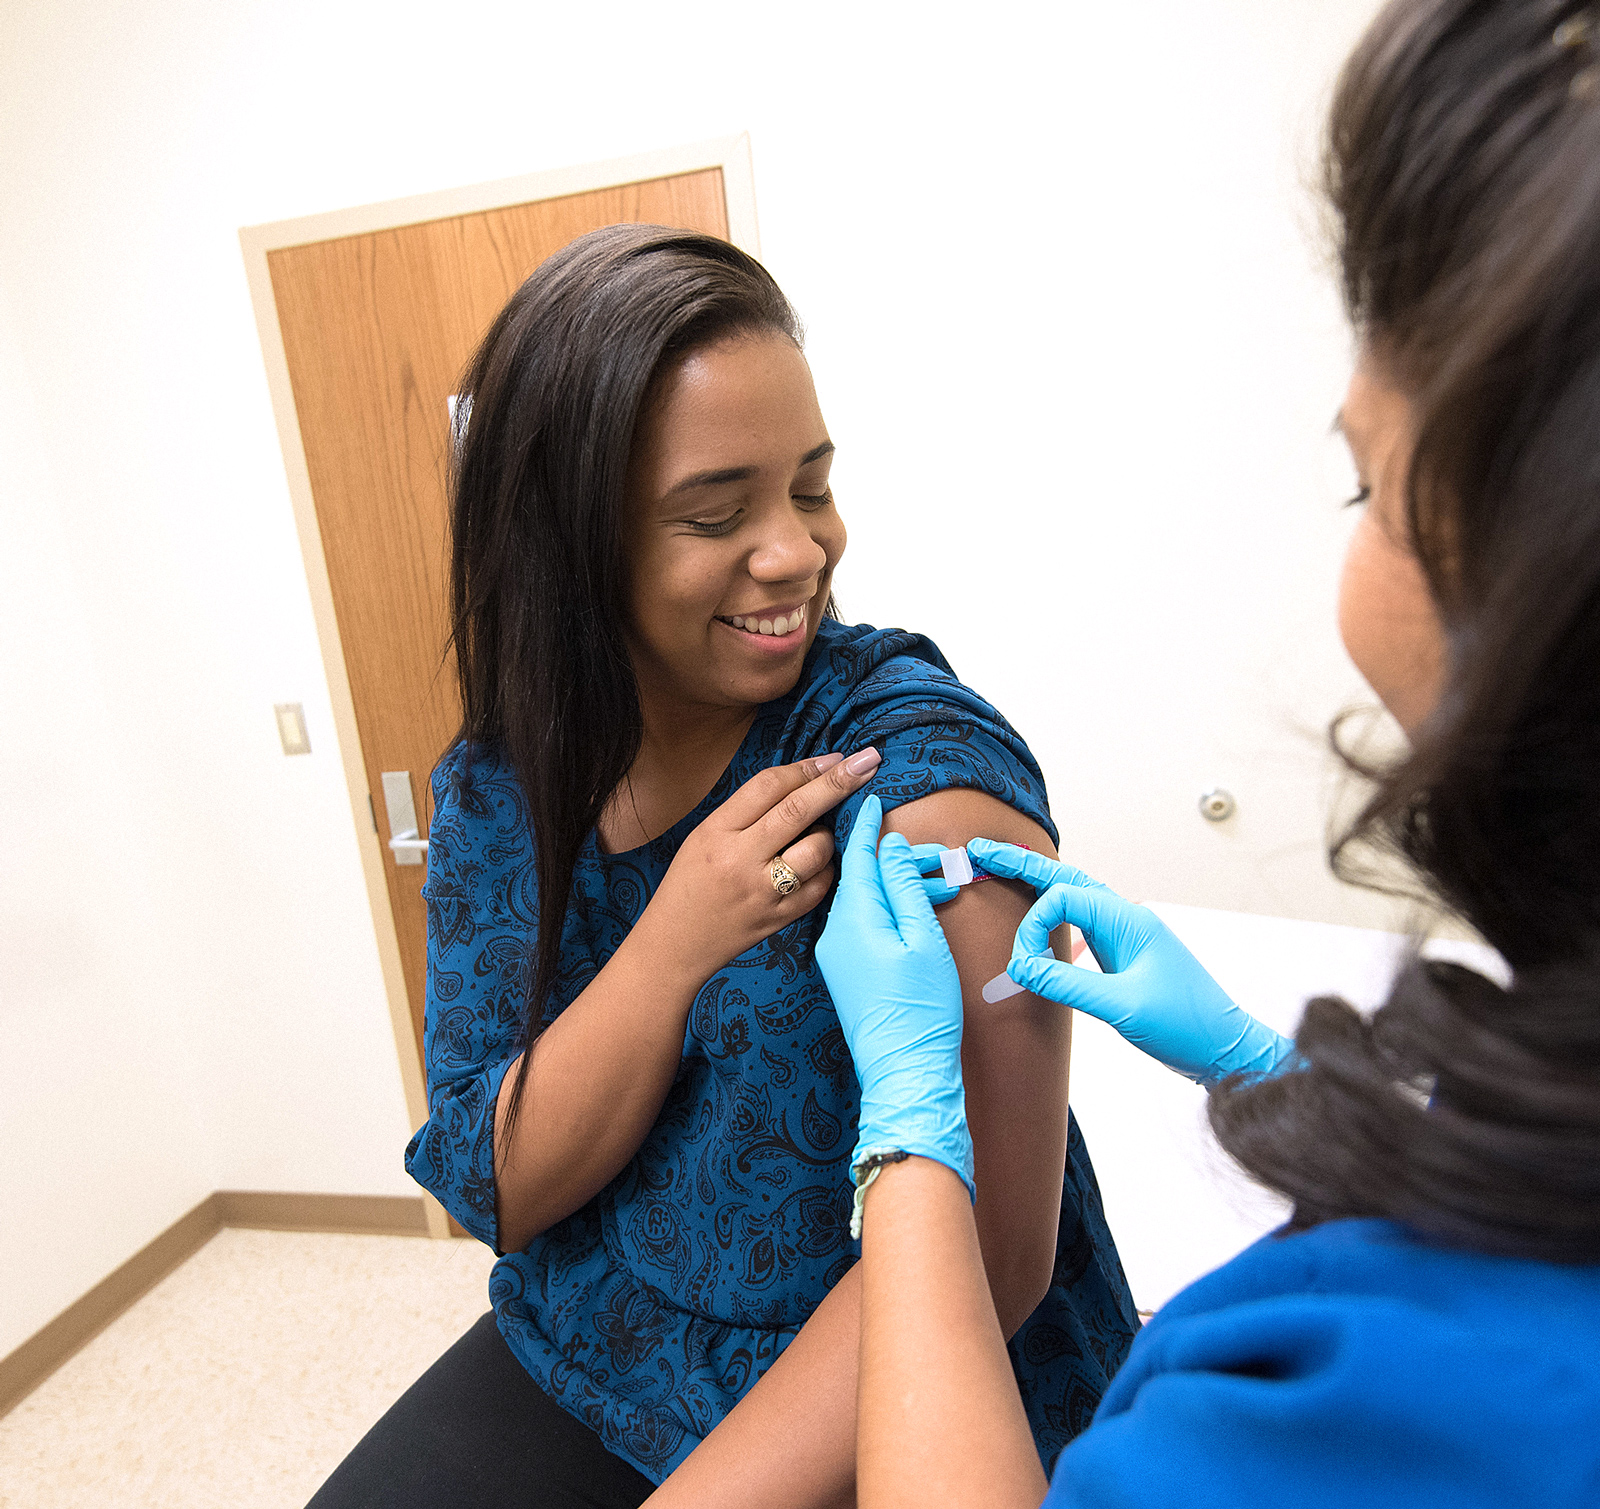 Image of a woman in a blue shirt receiving an immunisation from a health care worker